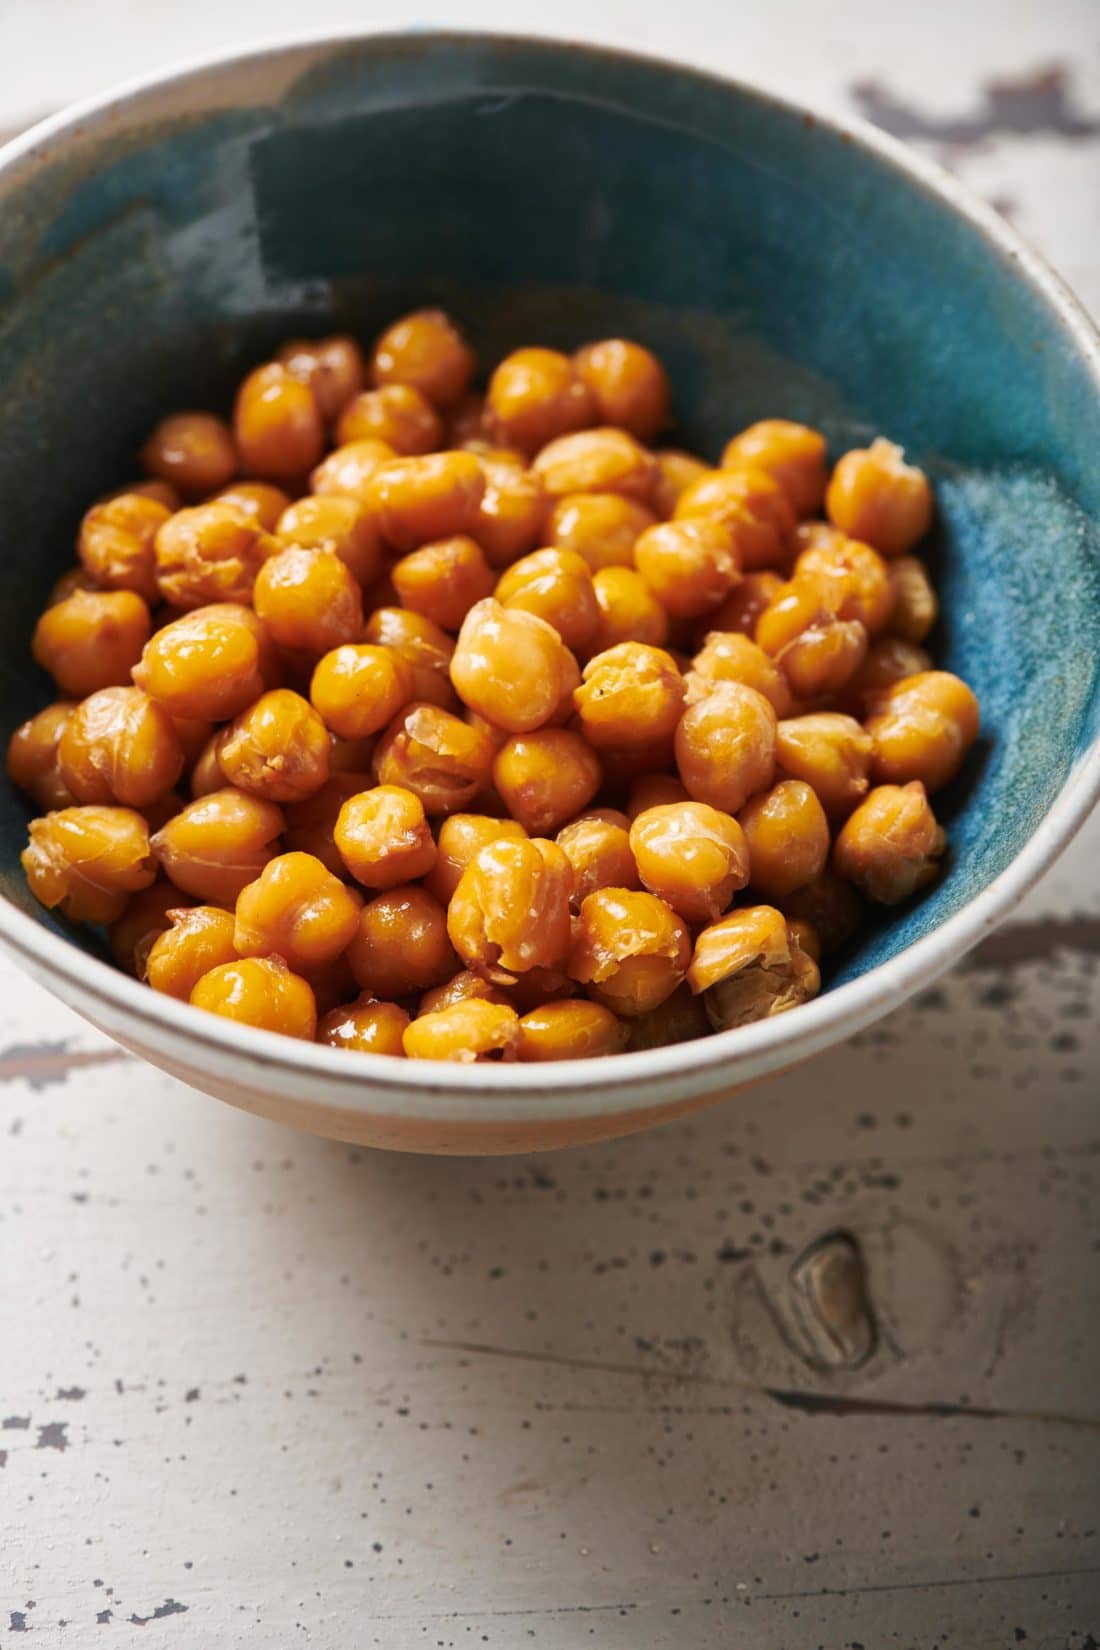 Bowl of Roasted Chickpeas.